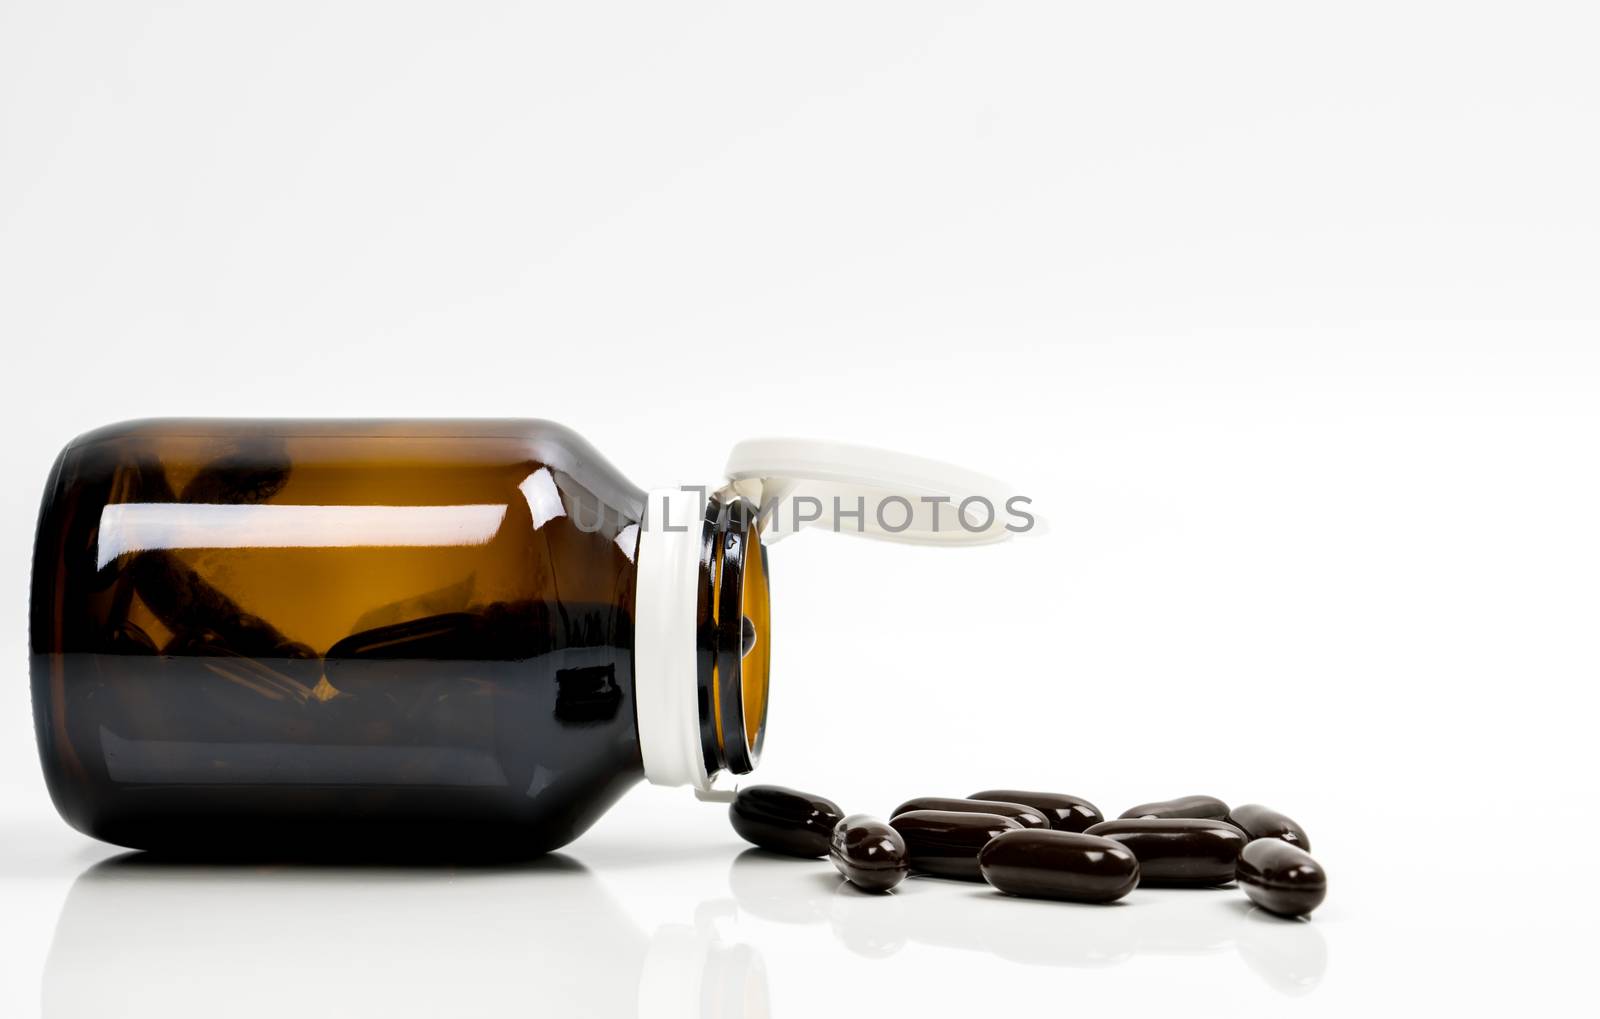 Multivitamins capsule pills for pregnant woman with amber bottle with blank label and copy space isolated on white background. Vitamins and supplements for hard working guy. Global healthcare concept